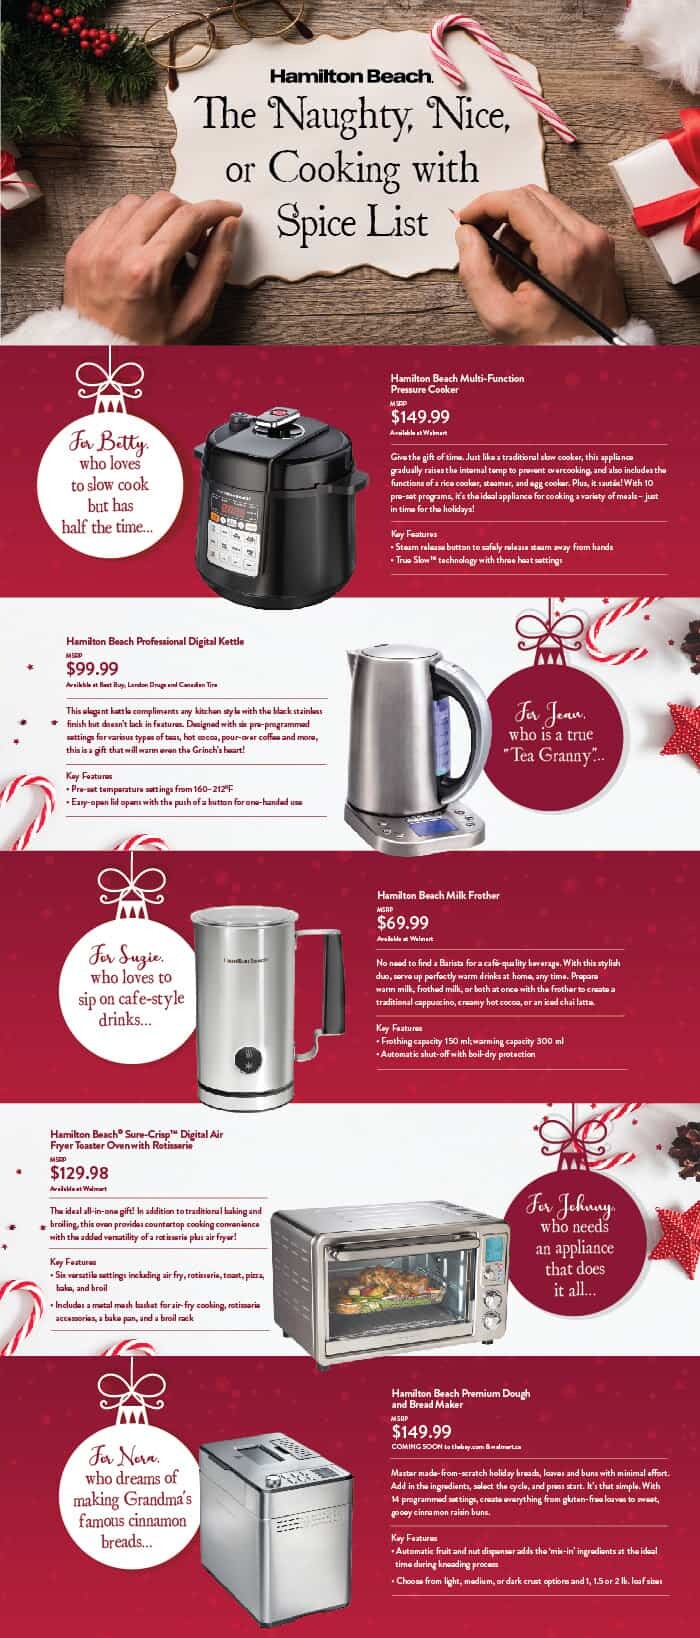 Hamilton Beach Gifts for the Holidays. Perfect for the Homemaker or Kitchen Enthusiast. From Tea to Cooking, Hamilton Beach has it all!